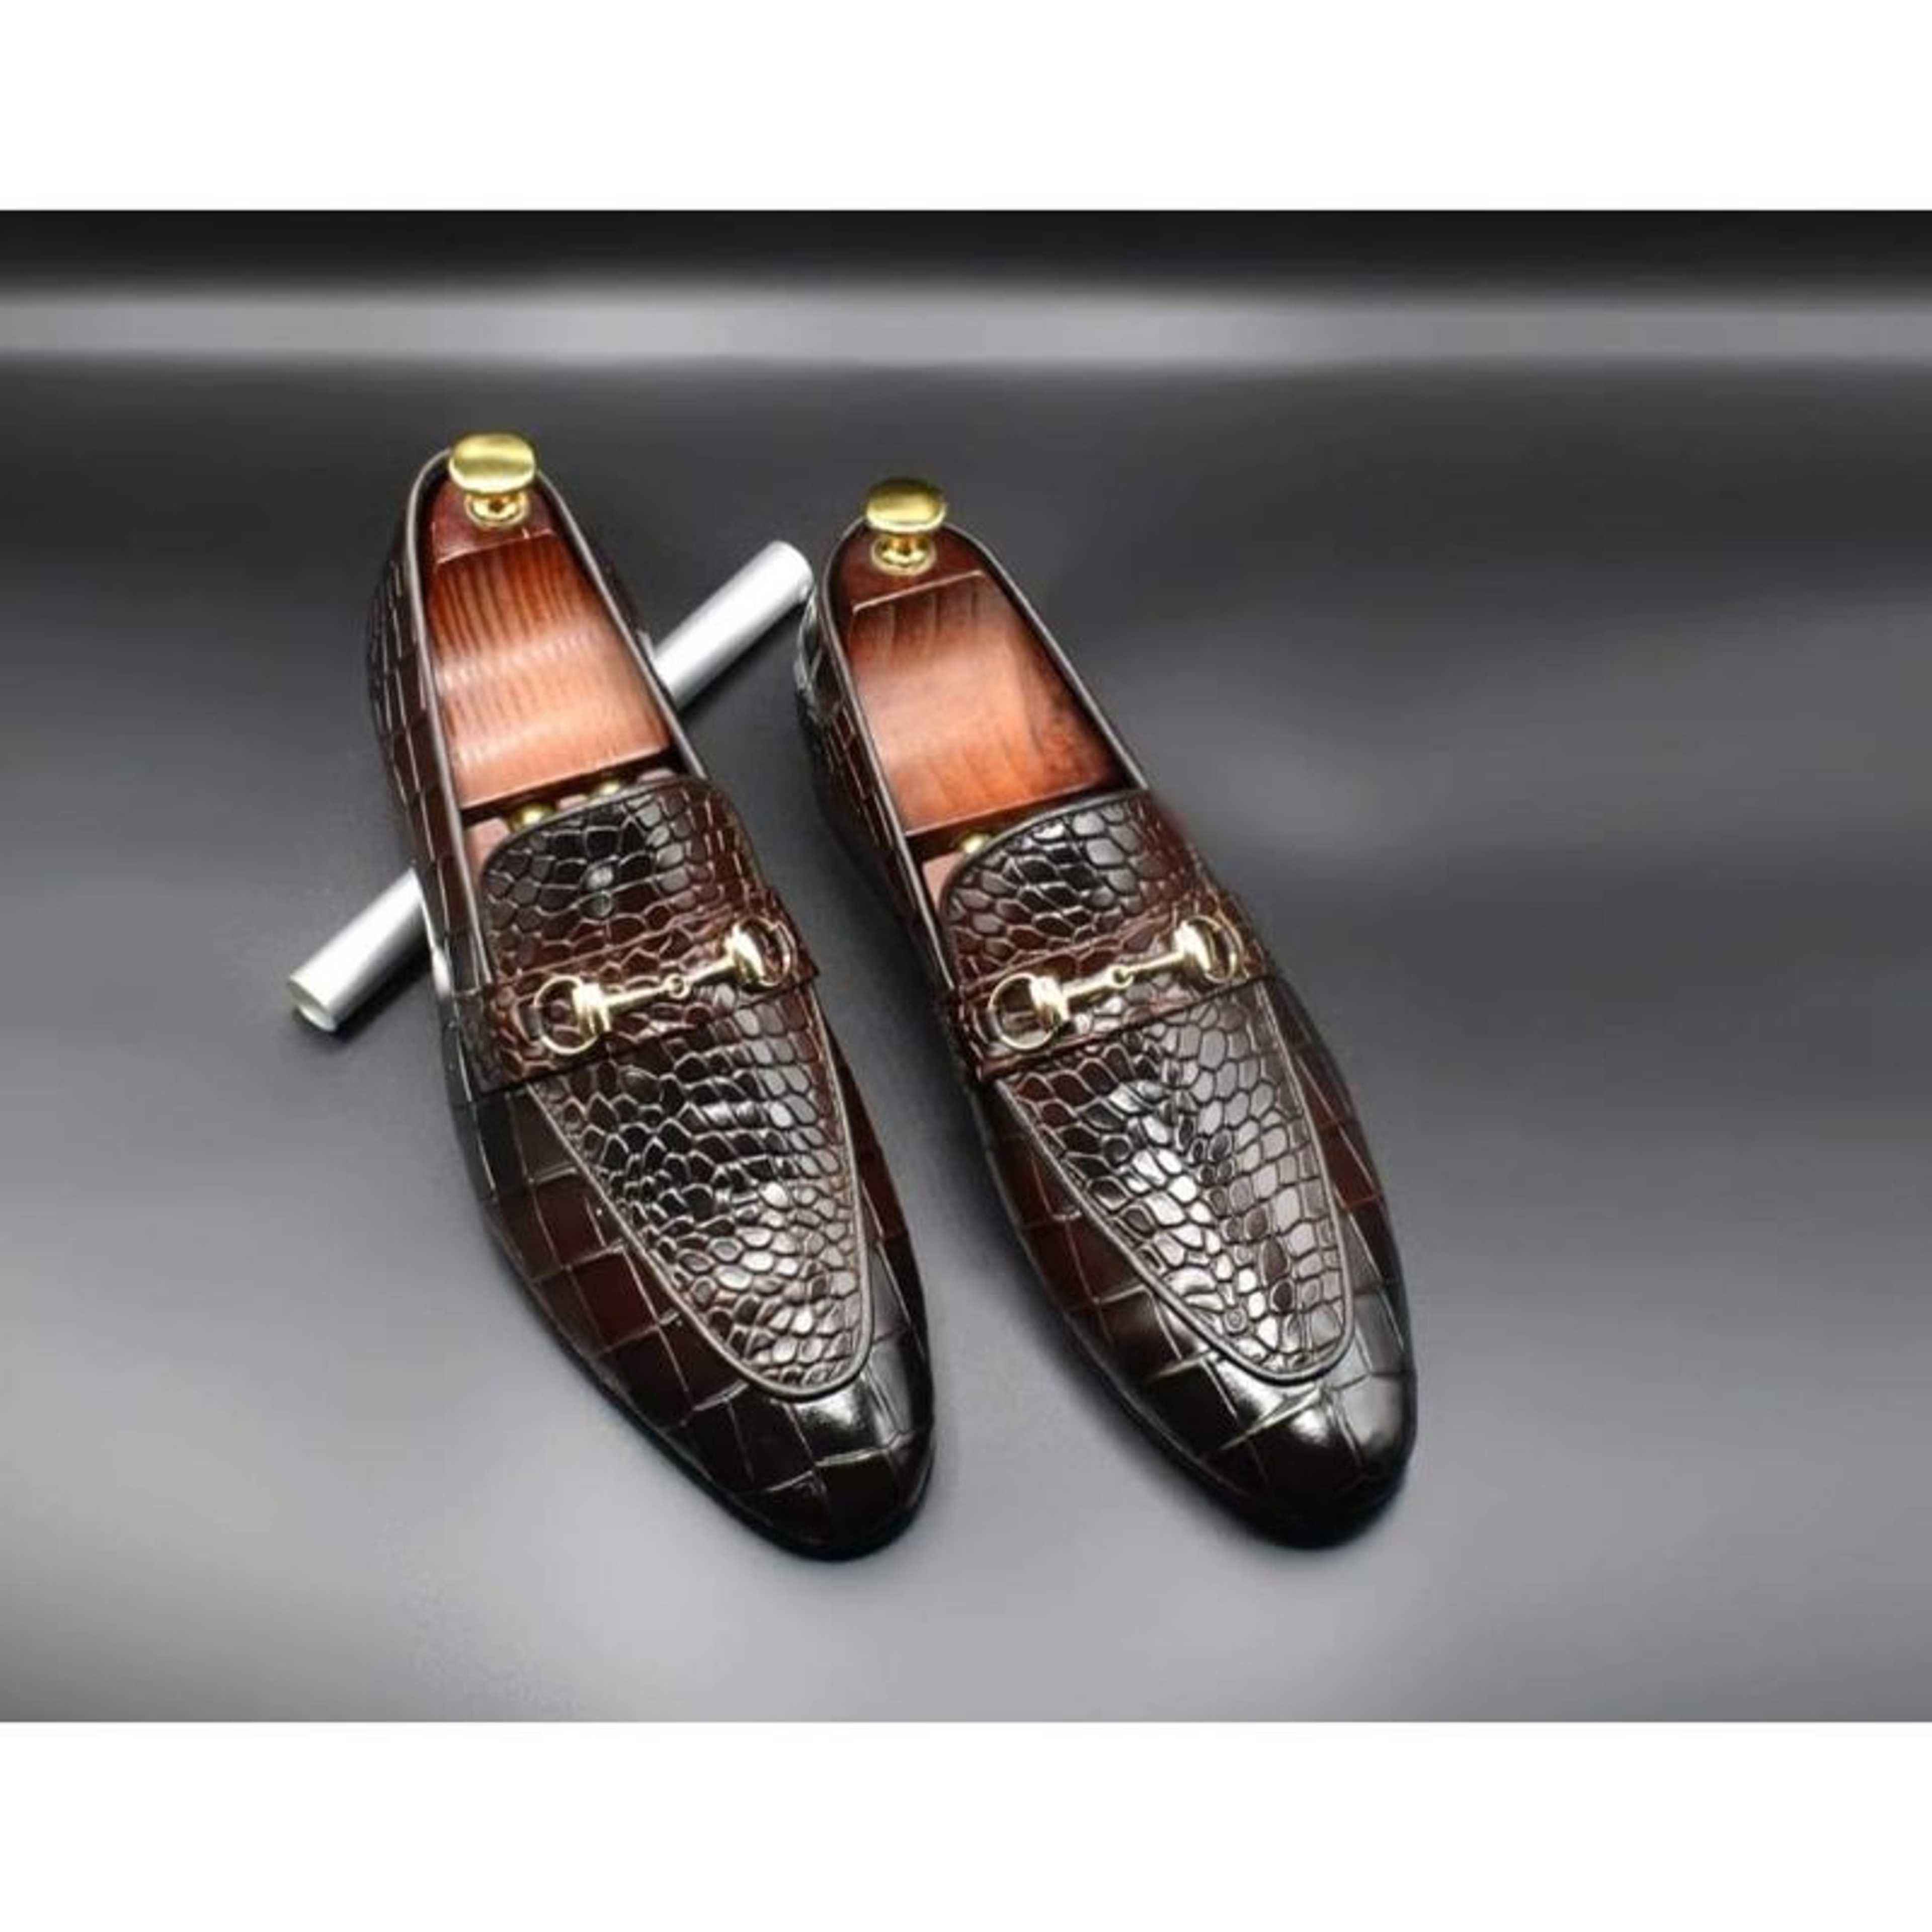 Crocodile Type Leather Shoes in Brown Color